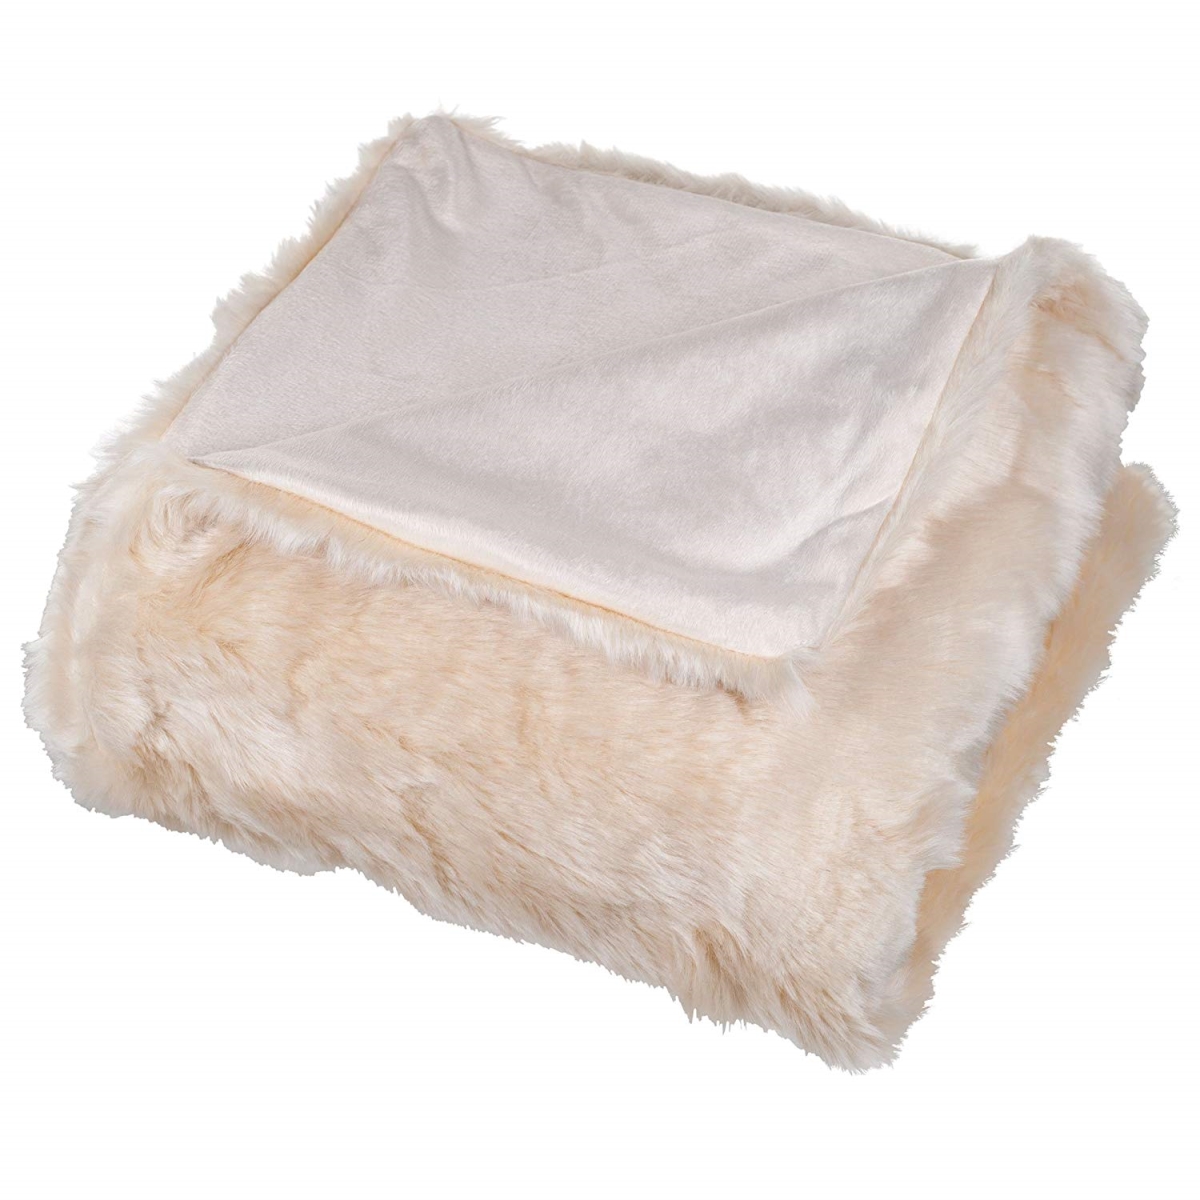 61a-26645 Luxury Long Haired Faux Fur Throw Blanket, Beige